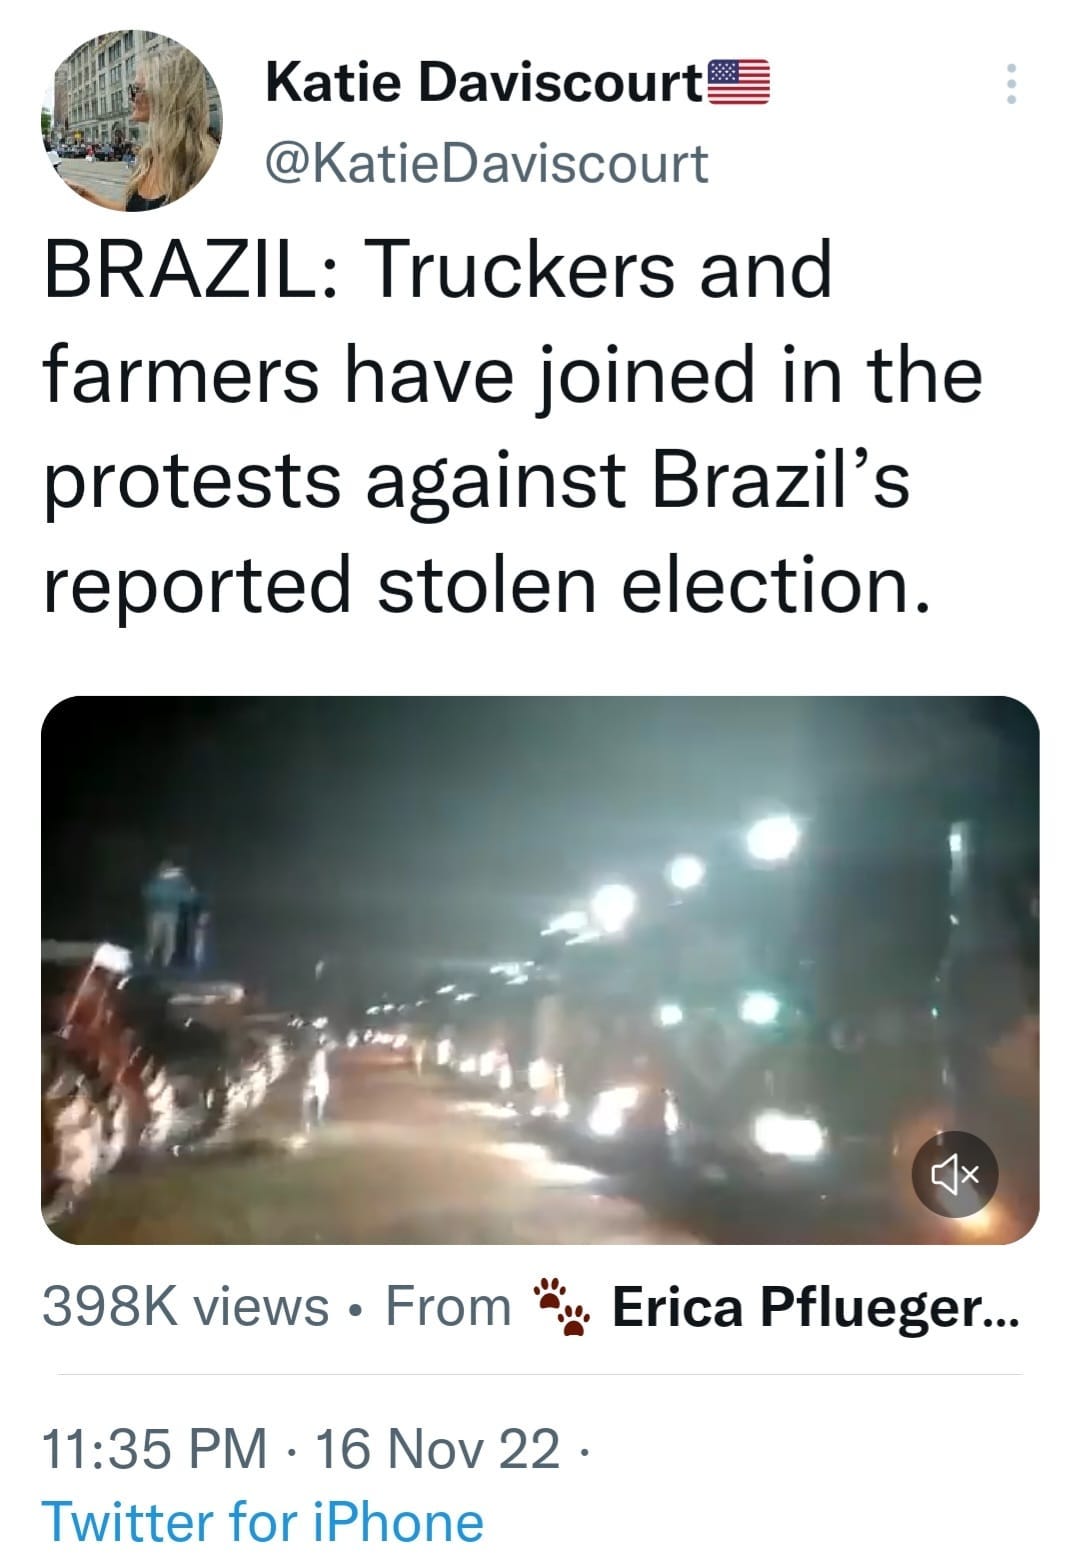 May be an image of text that says 'Katie Davcourt @KatieDaviscourt BRAZIL: Truckers and farmers have joined in the protests against Brazil's reported stolen election. 398K views From Erica Pflueger... 11:35 PM .16 16 Nov 22. 22 Twitter for iPhone'